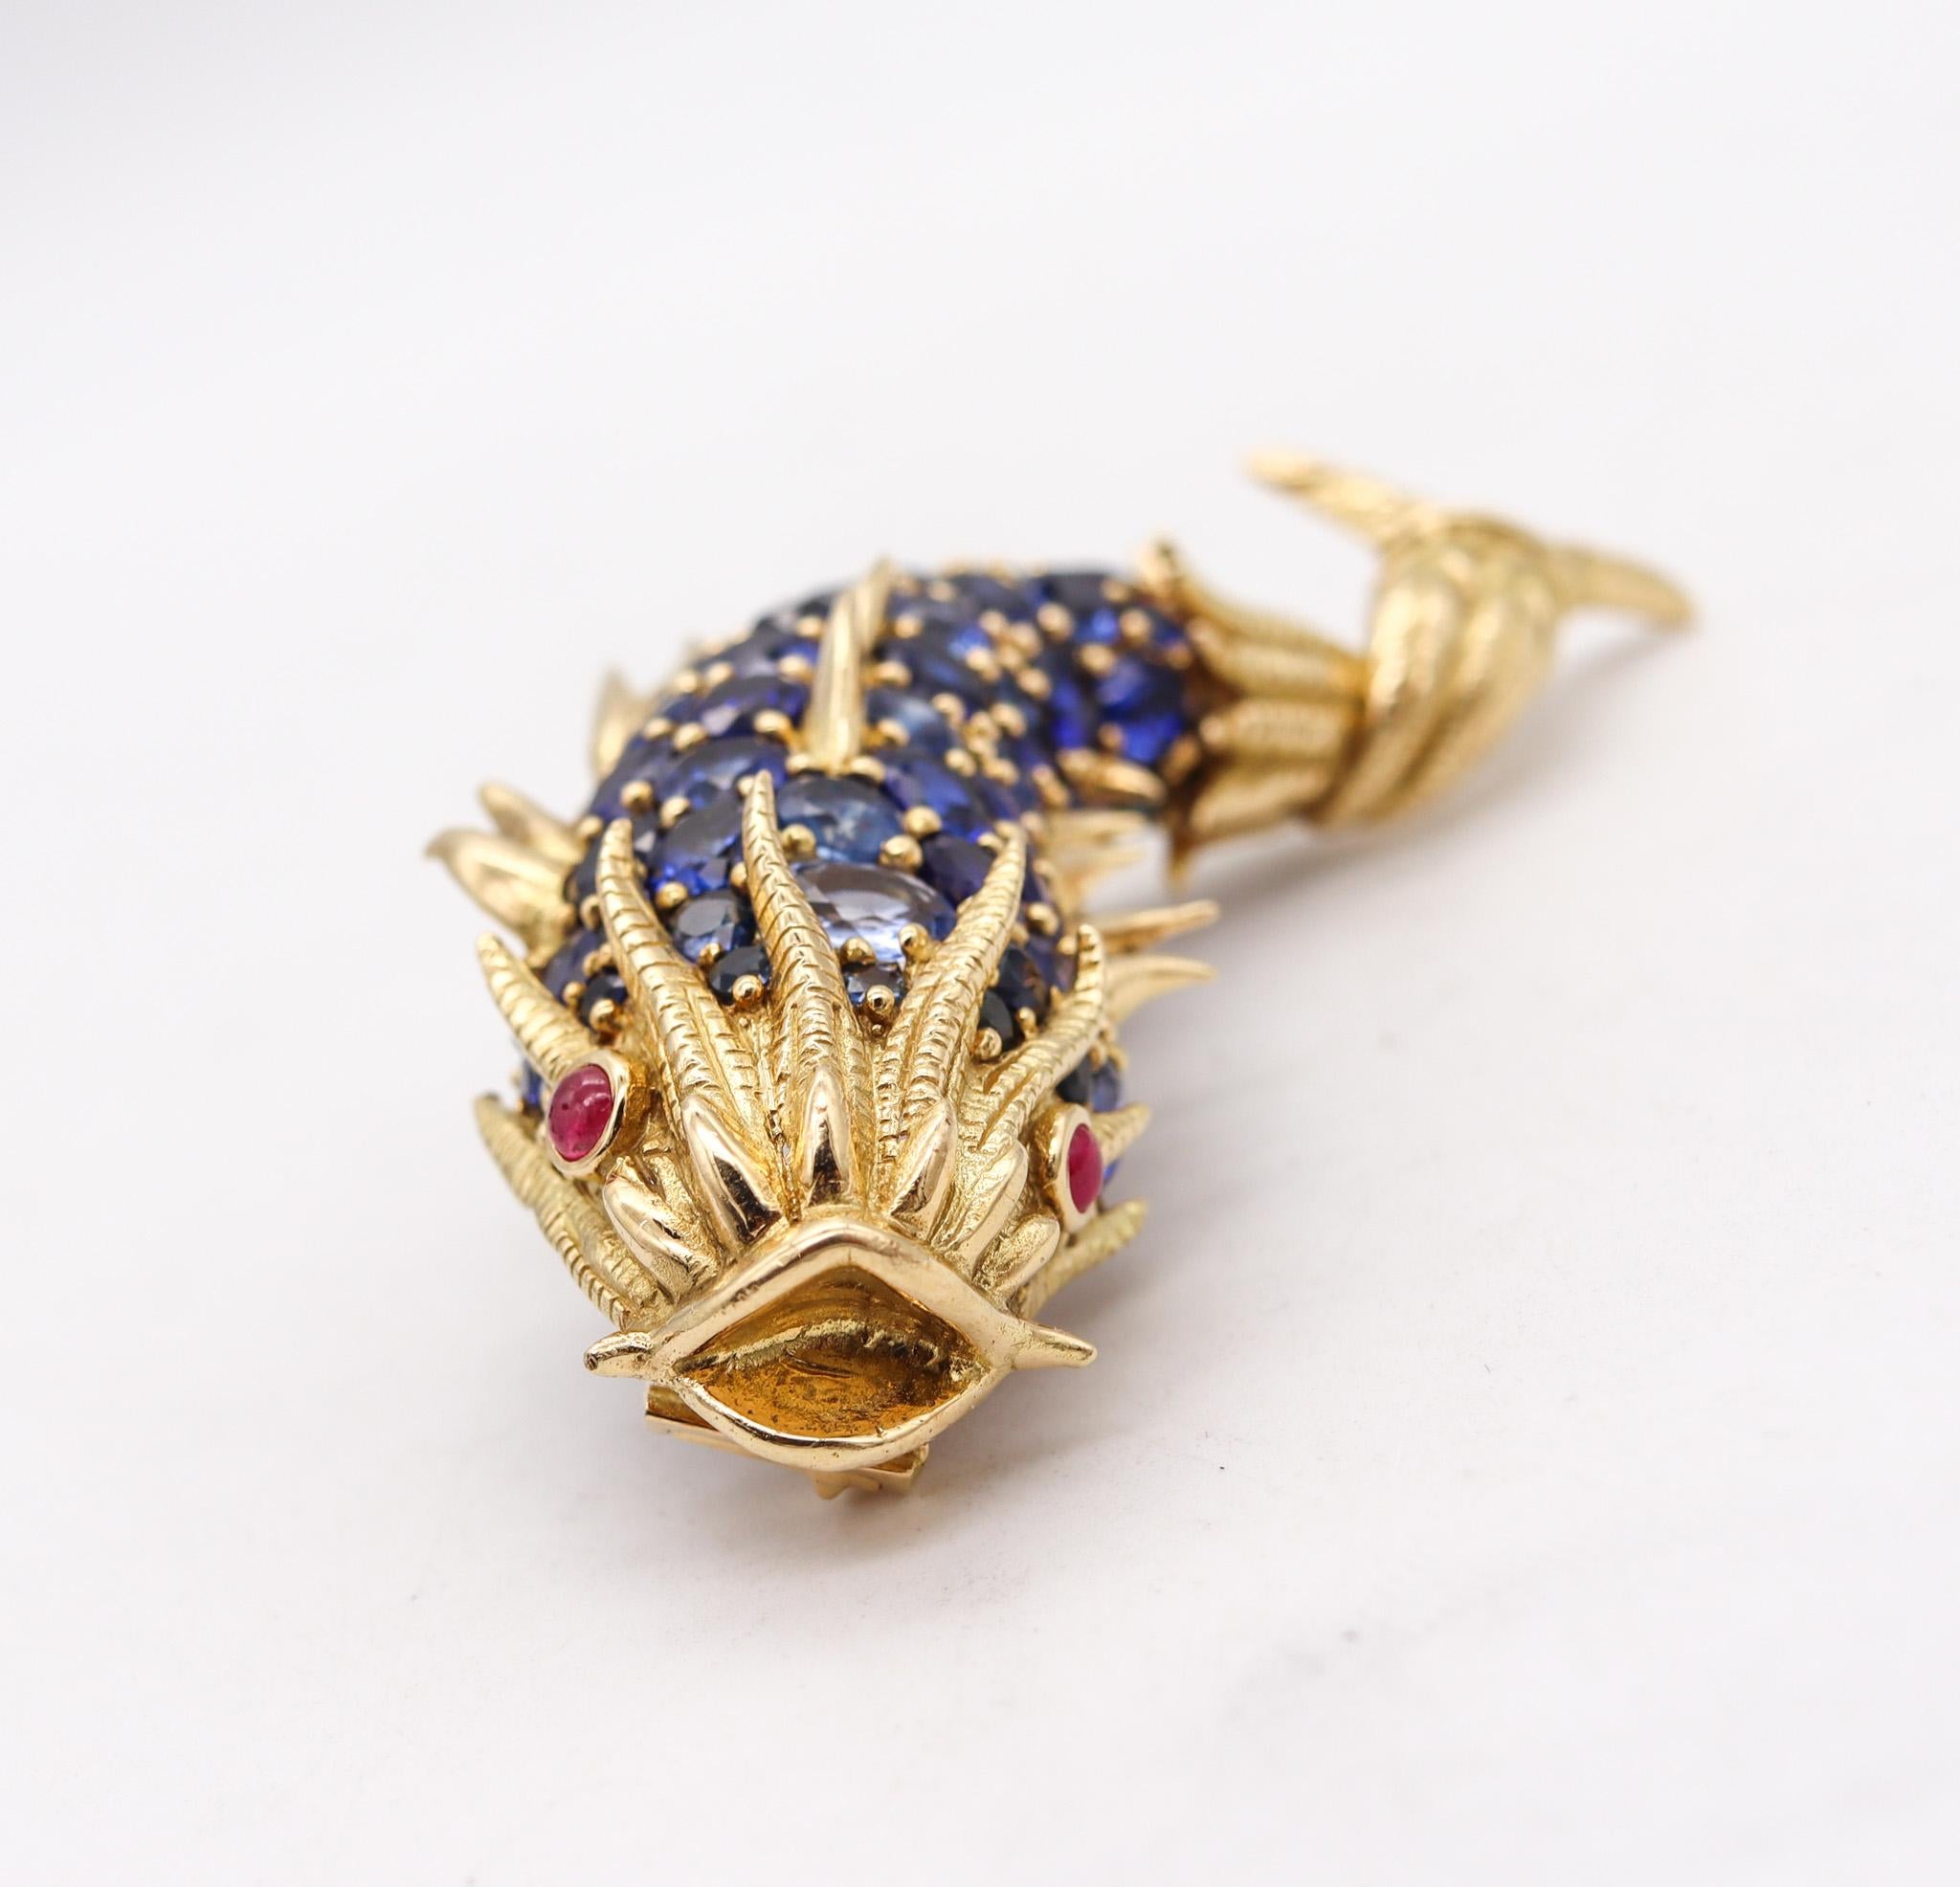 Oval Cut Tiffany & Co 1968 Mythological Fish Brooch in 18kt Gold with 60.05 Ctw Sapphires For Sale